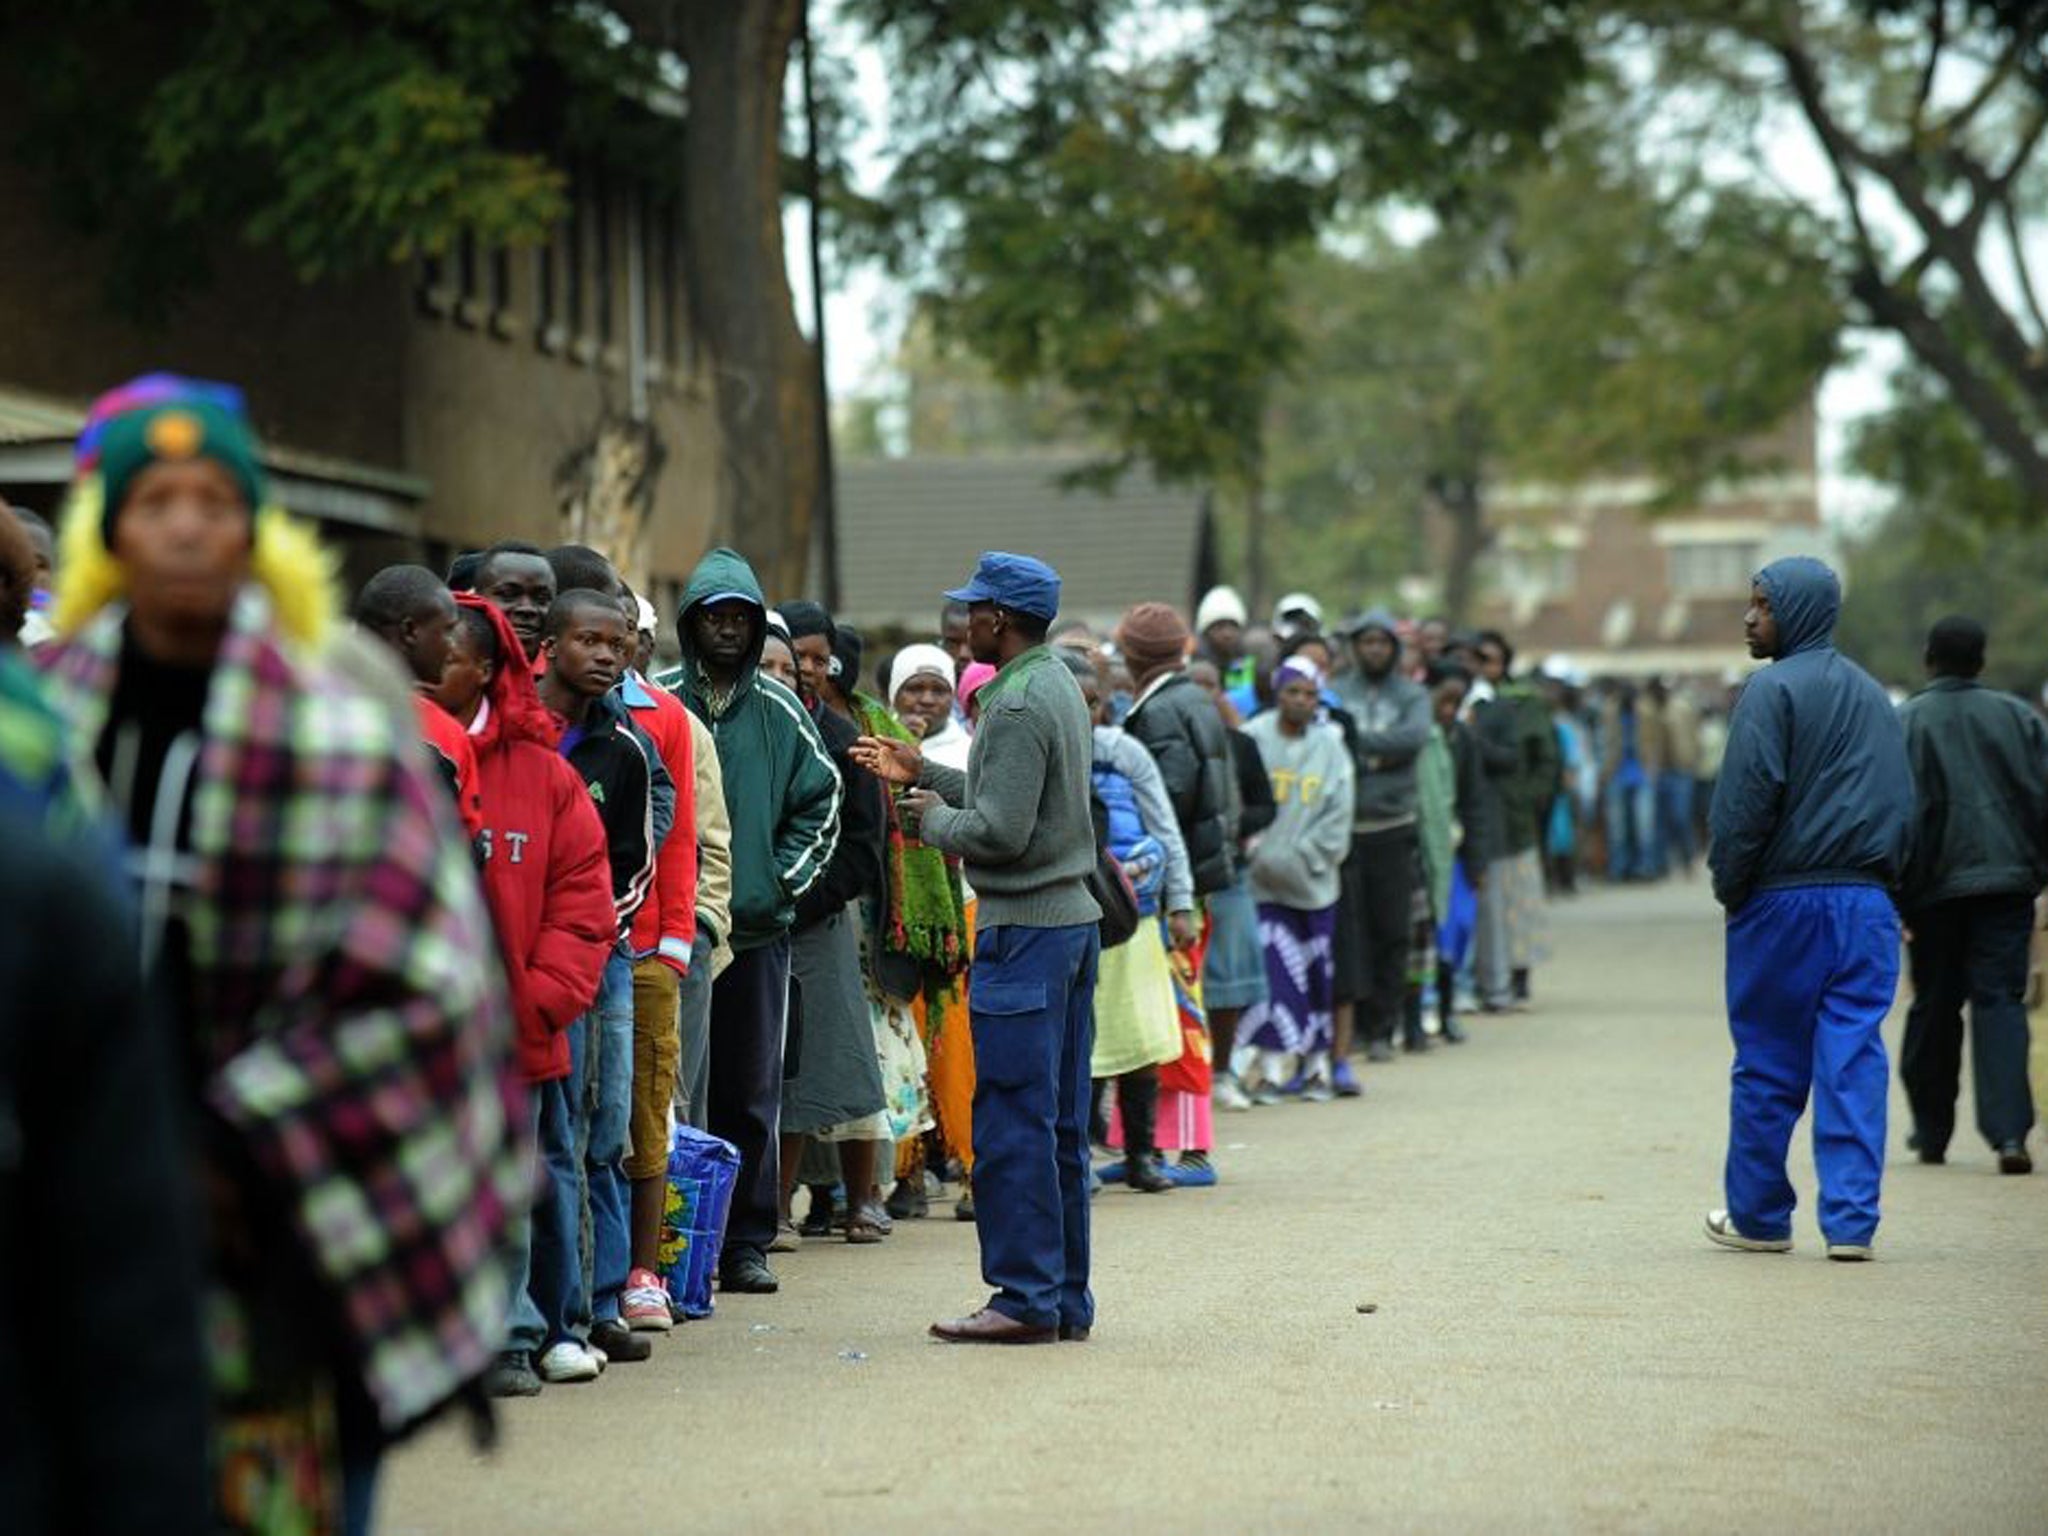 Zimbabweans line up near a polling station in Harare